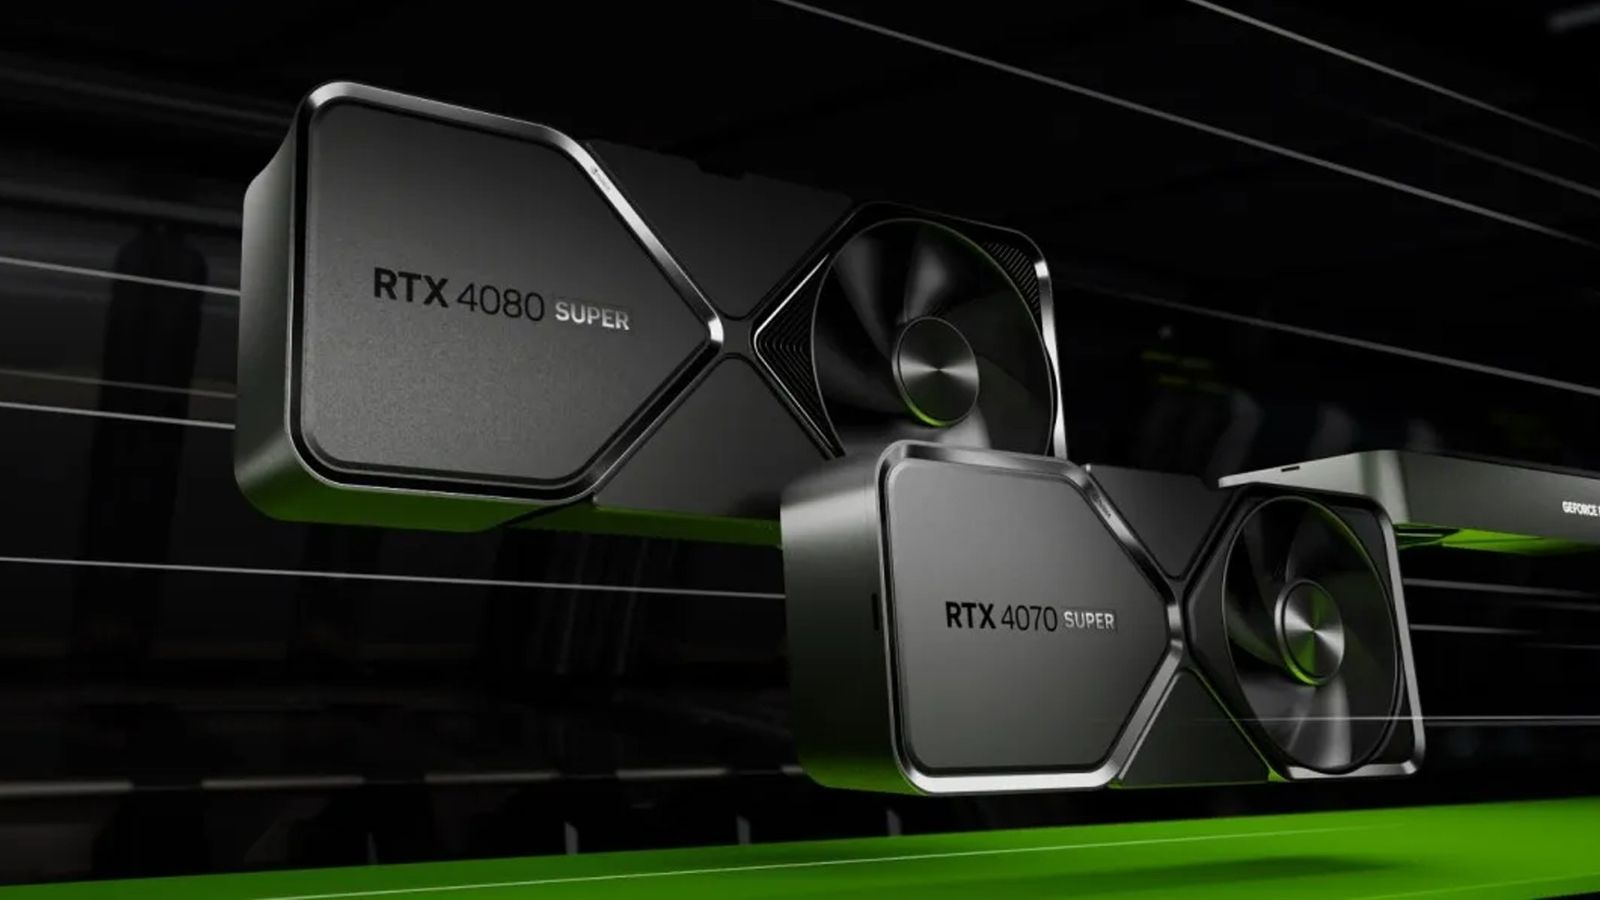 Nvidia RTX 4000 Super cards showcased in press image from Nvidia